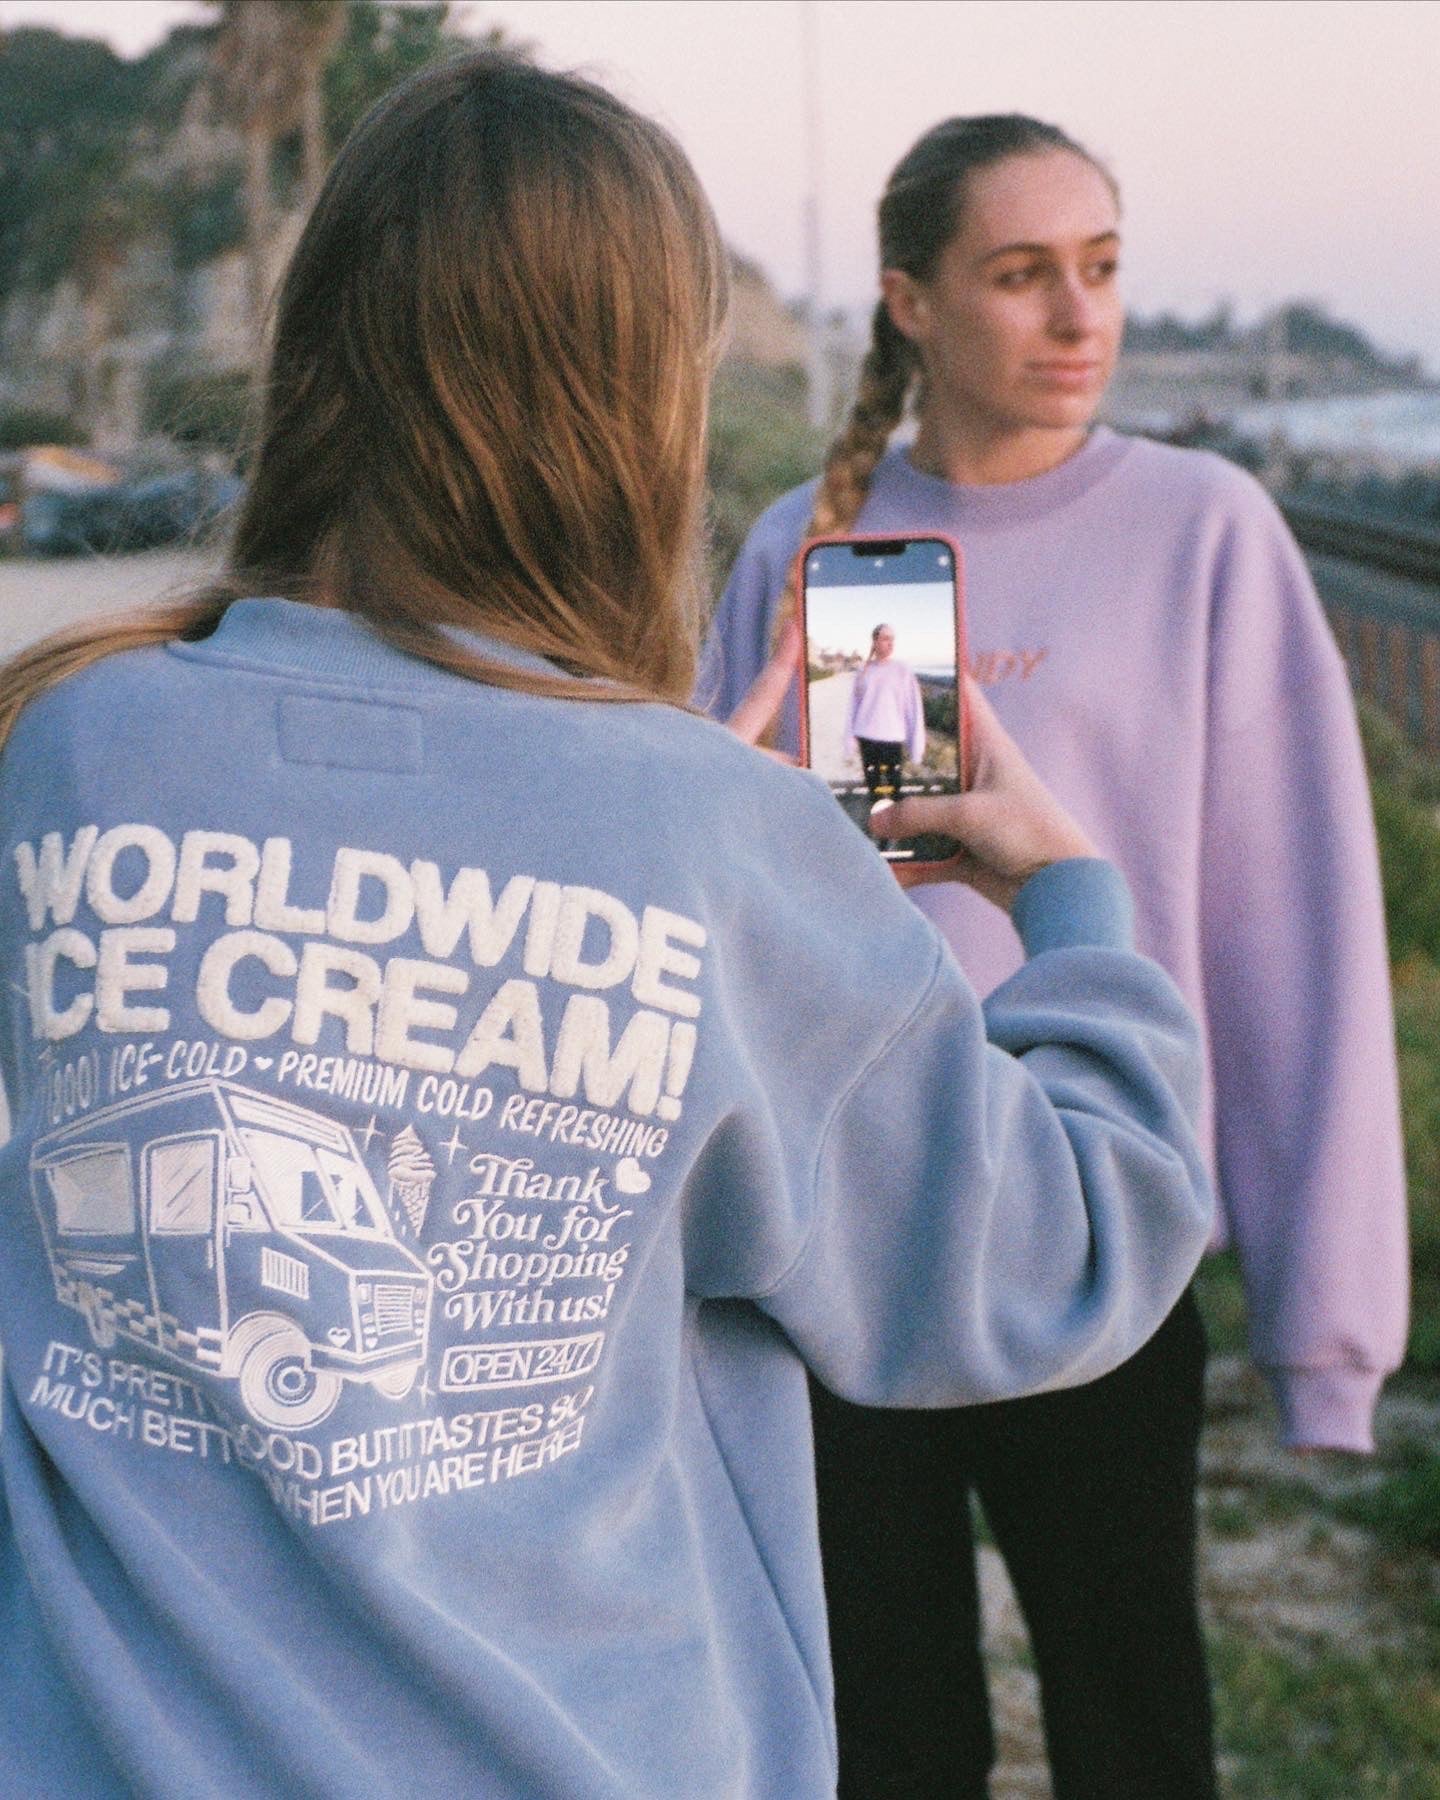 "Let's Watch the Sunset" Embroidered Crew Neck in Lavender